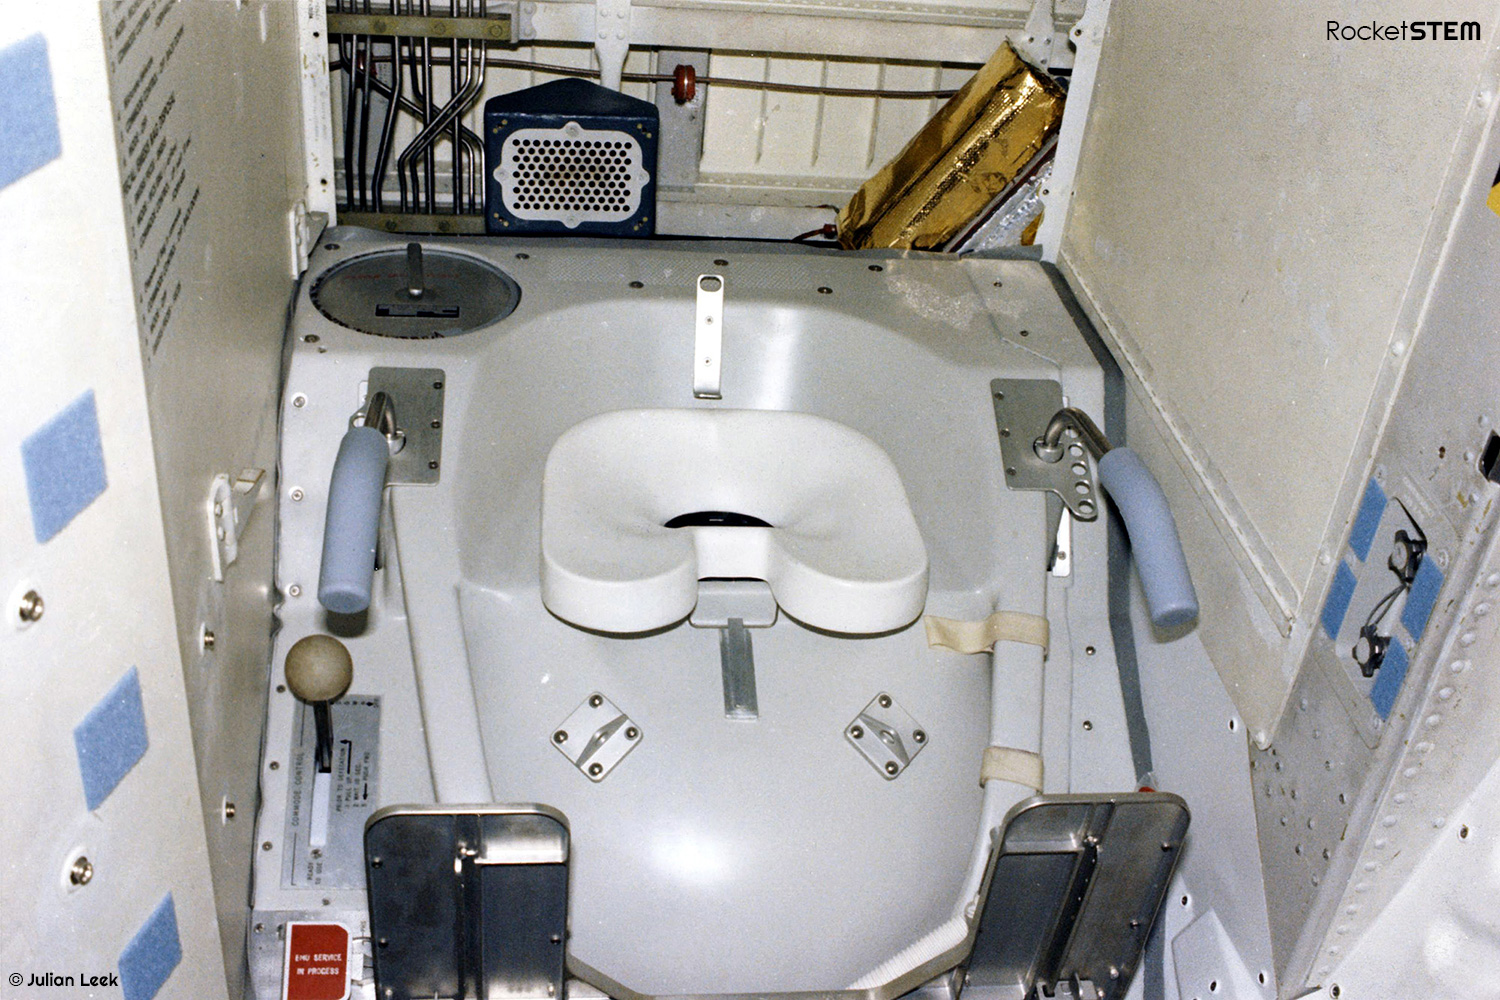 space-toilet-zSTS7-19830500_S83-32562